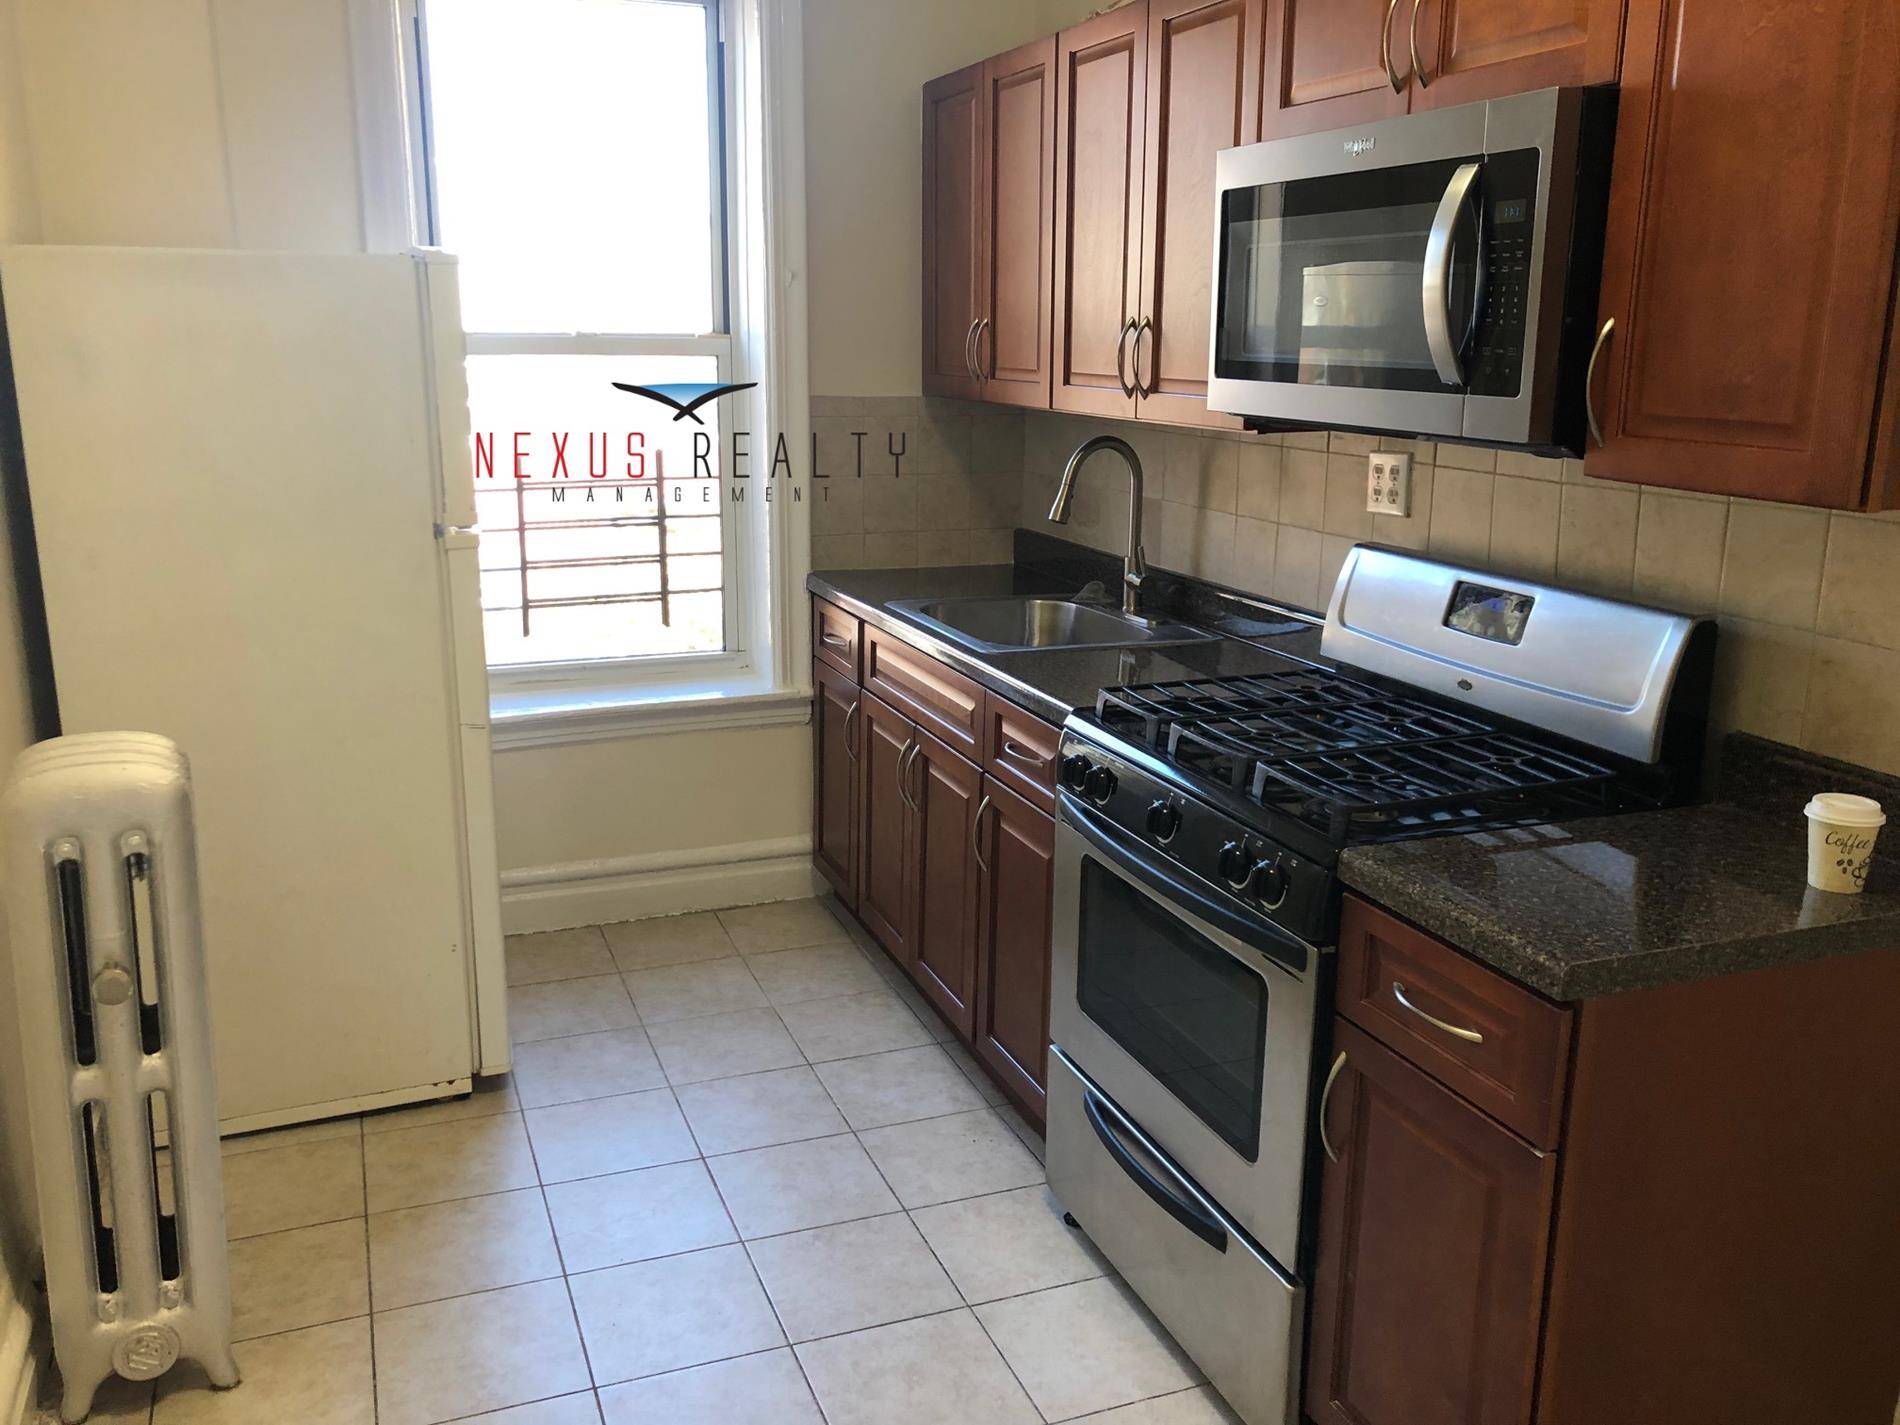 Spacious 2 Bedroom apartment in Astoria 23002 Spacious Bedrooms on the top floor in a 3 story private houseSunny eat in kitchen with stain steel appliances, microwave, and great cabinet ...